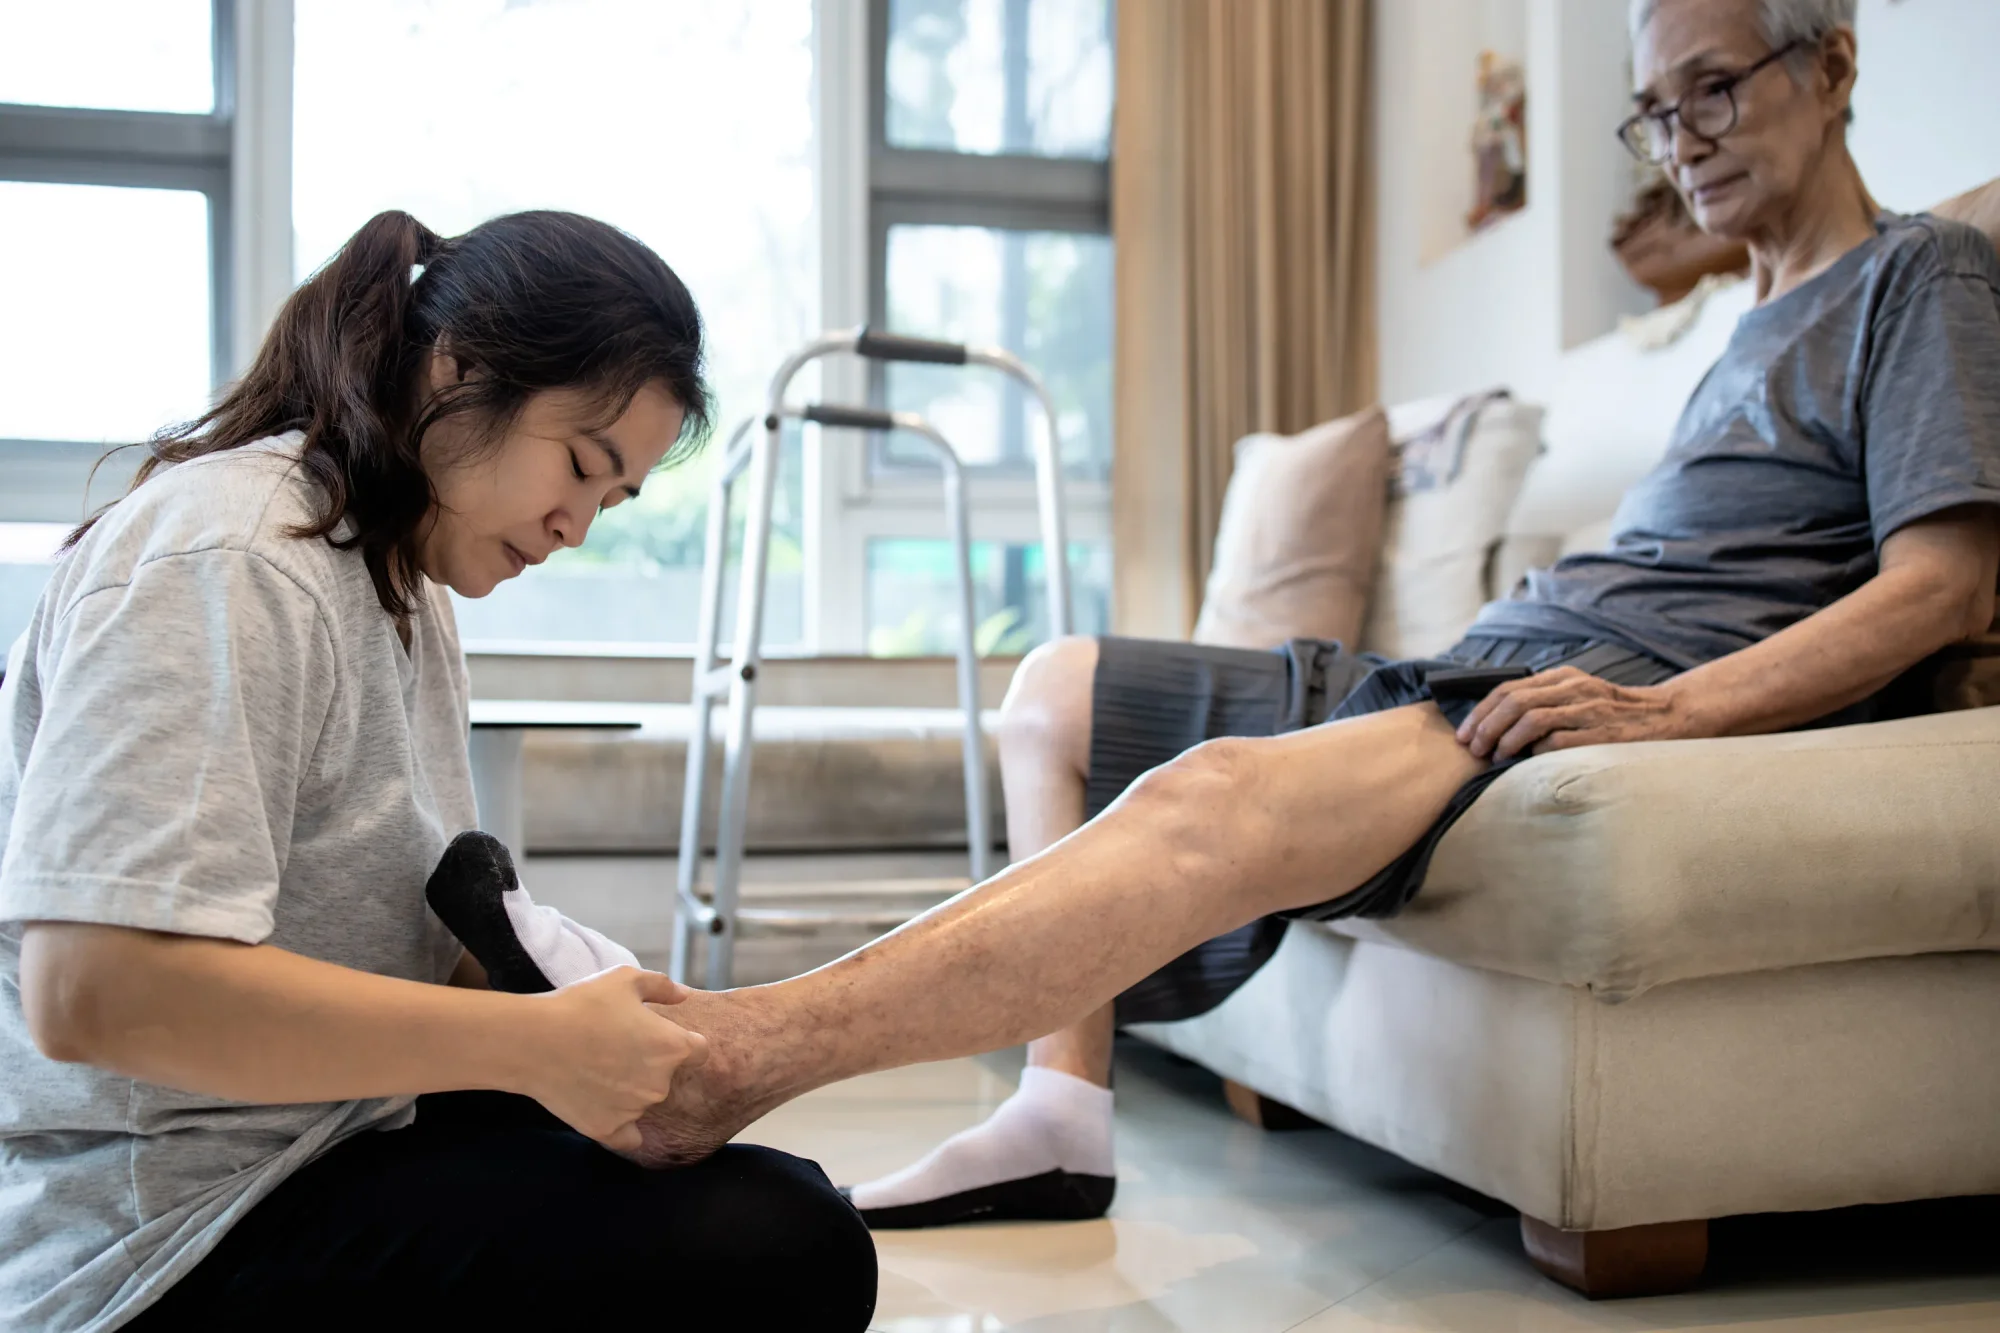 Asian daughter helping elderly dad put on socks for neuropathy.